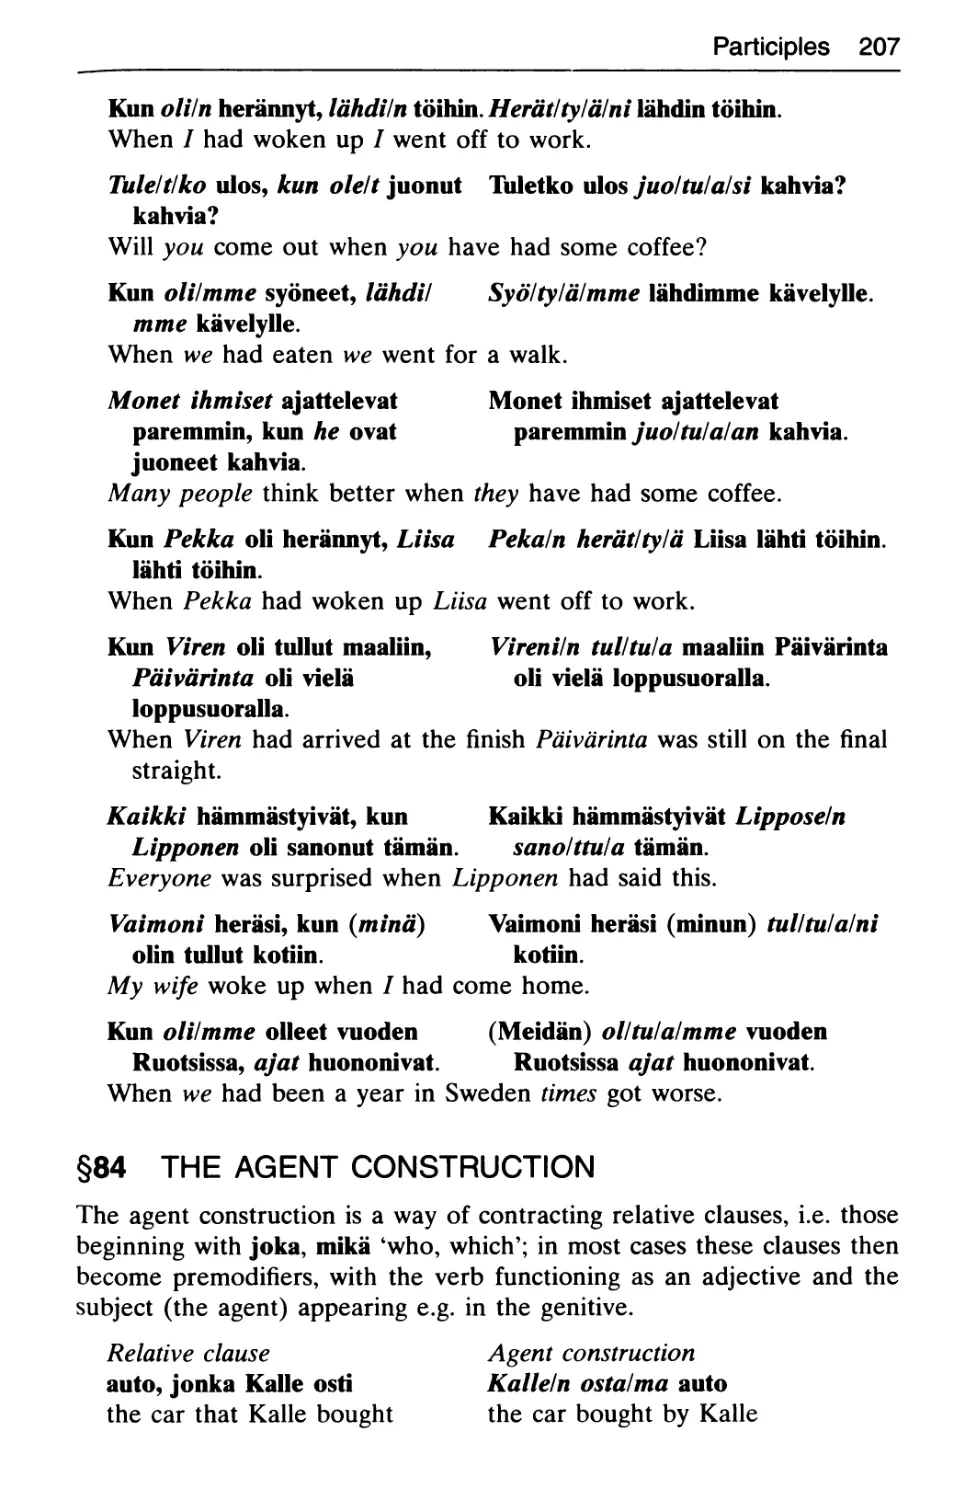 §84 The agent construction